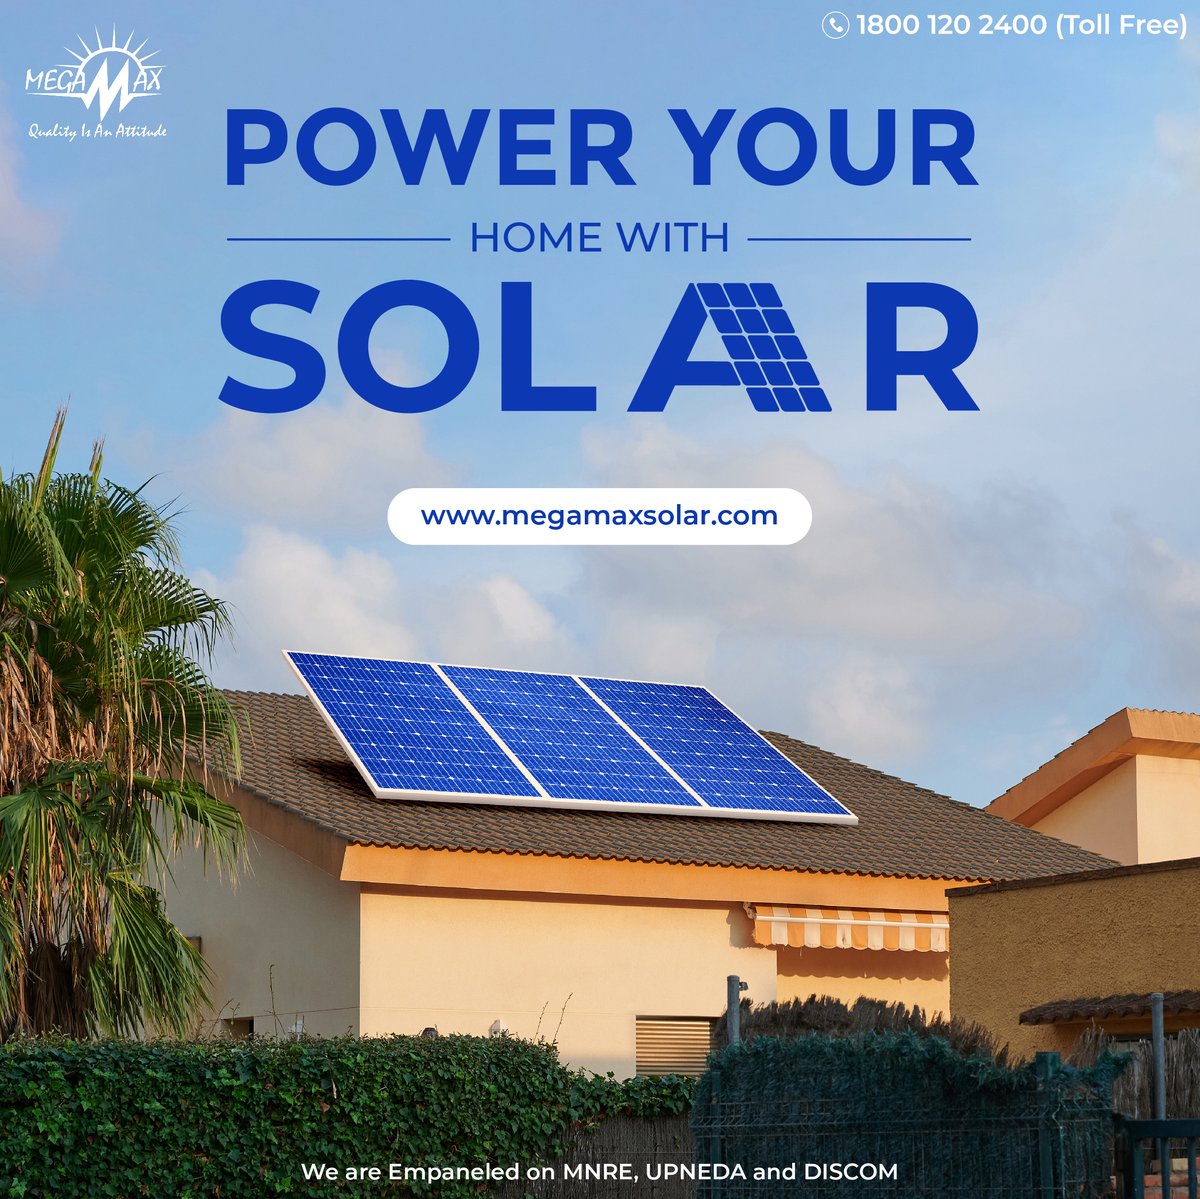 Say goodbye to high electricity bills and hello to renewable energy! ☀️🏠 Power your home with Megamax Solar and join the movement toward a sustainable future. 🌿 

#solarpower #renewableenergy #sustainability #gogreen #poweryourhome #gosolar #cleanenergy #solarpanels